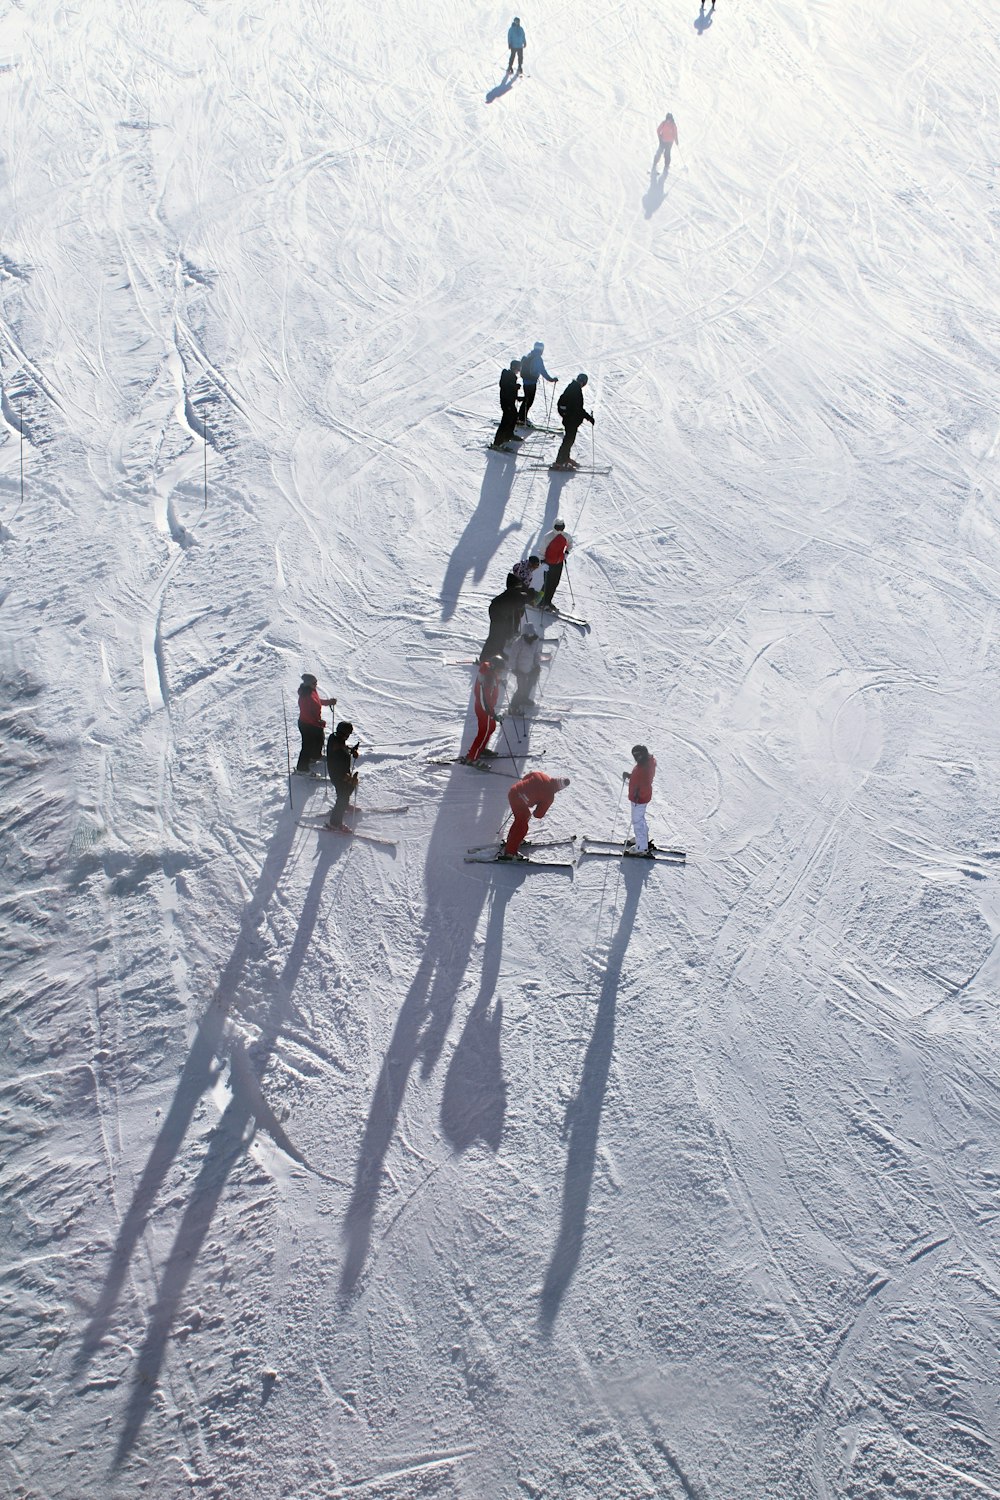 people skiing on snow during daytime